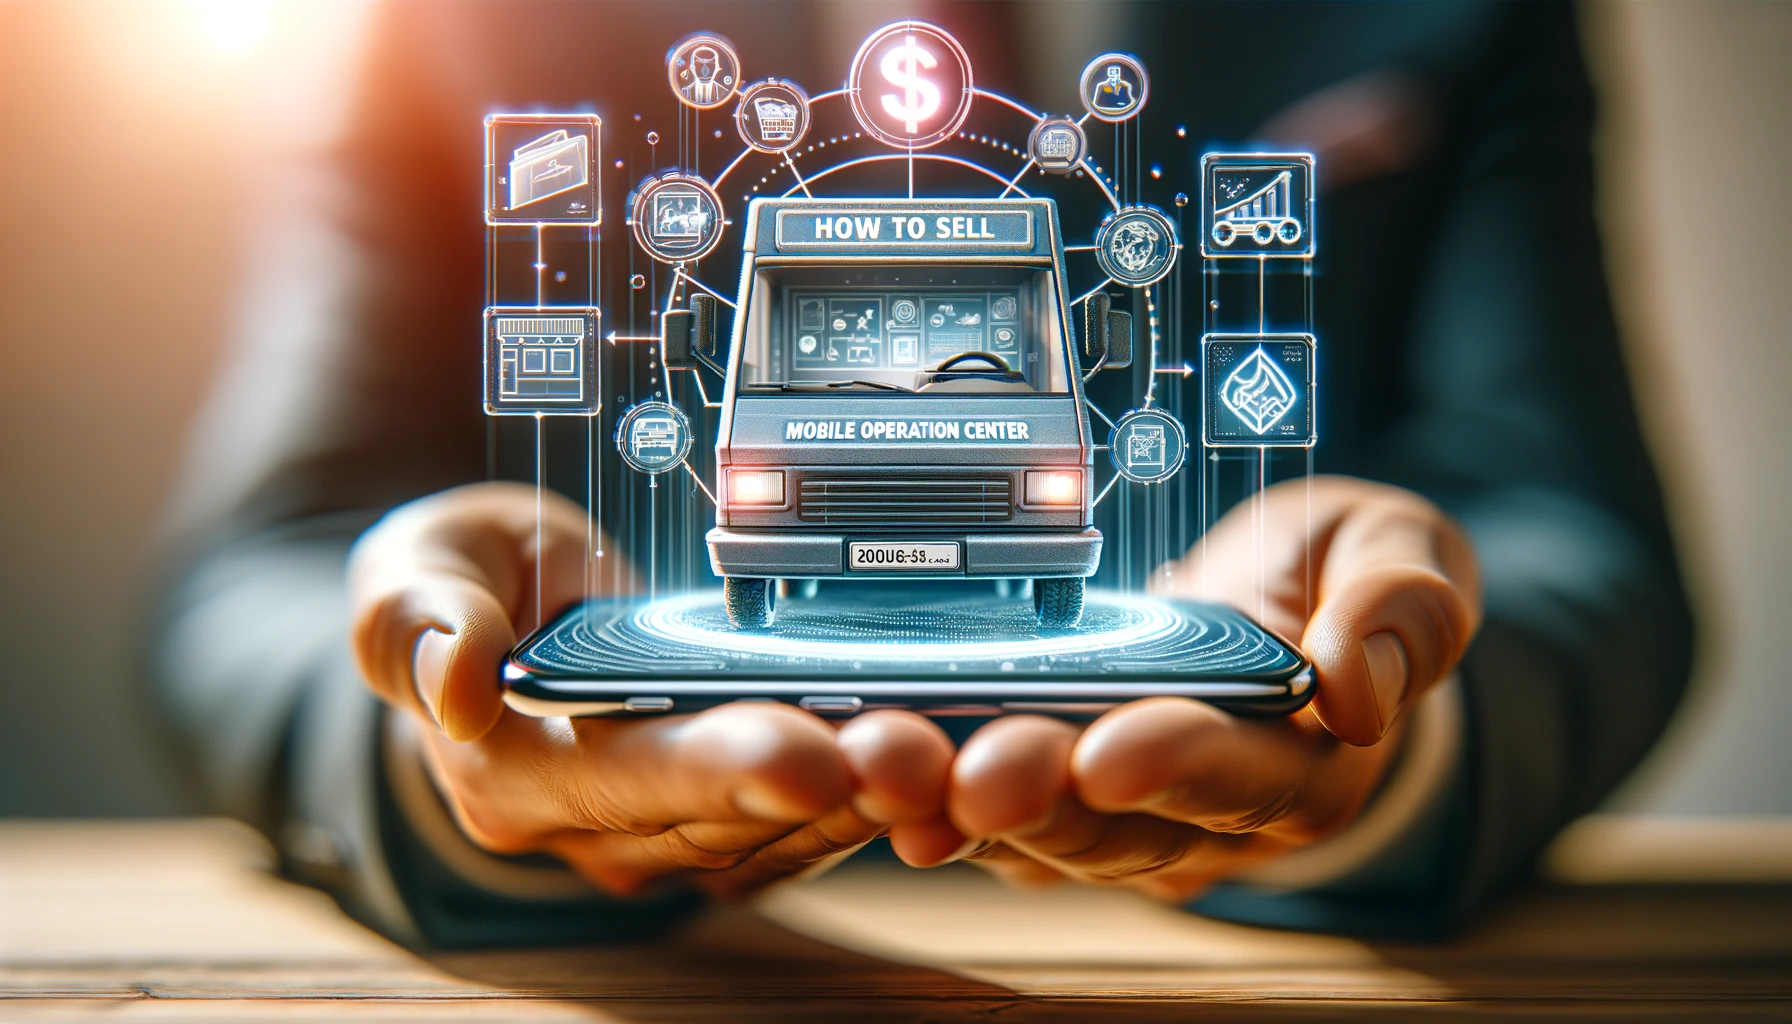 How to Sell Mobile Operation Center